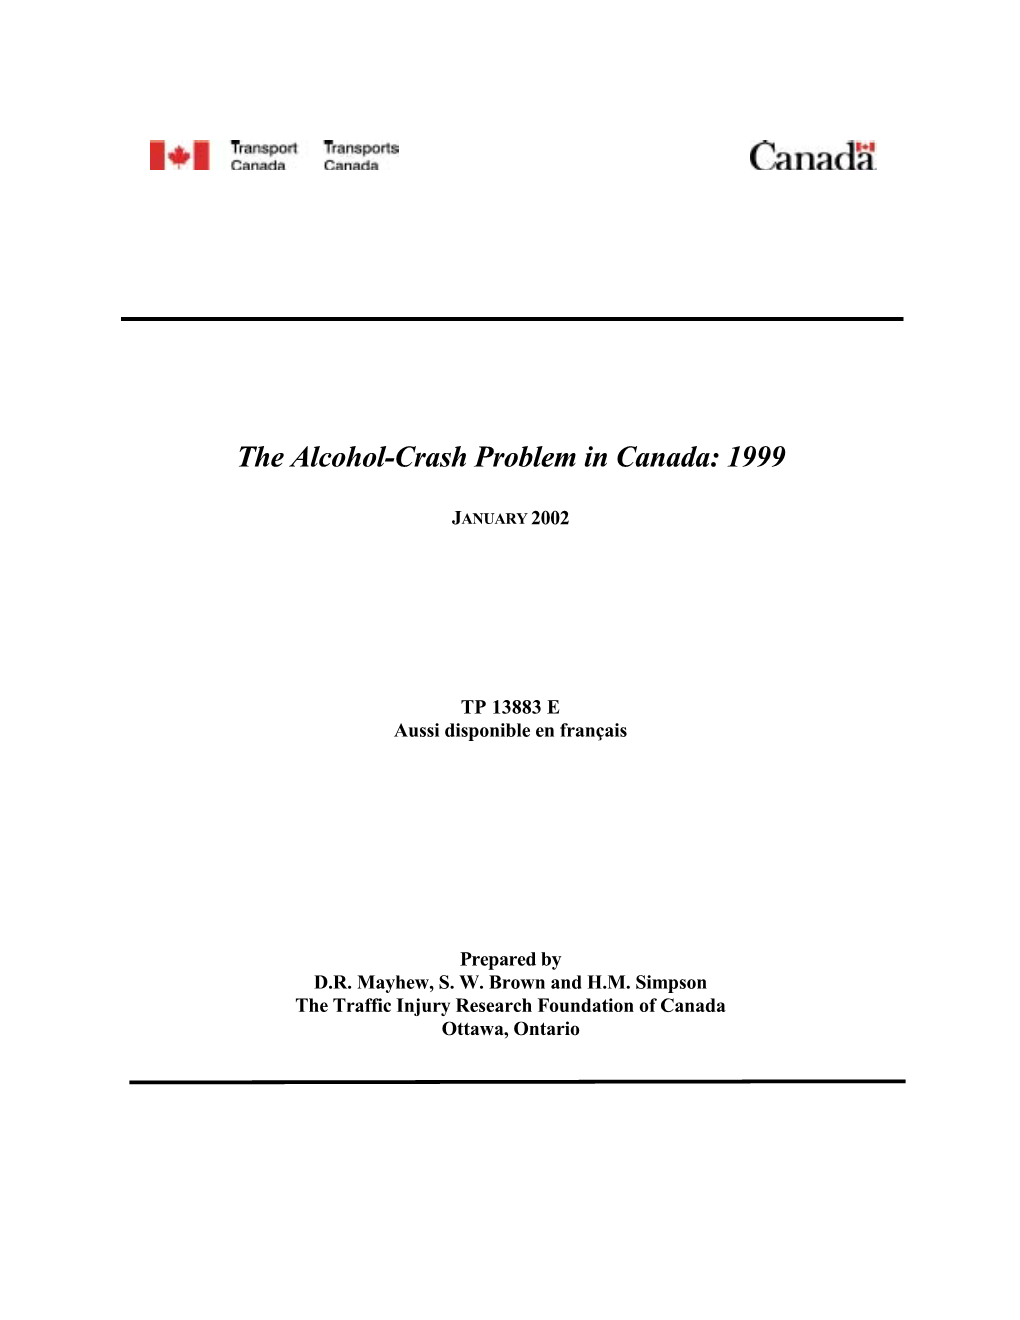 The Alcohol-Crash Problem in Canada: 1999